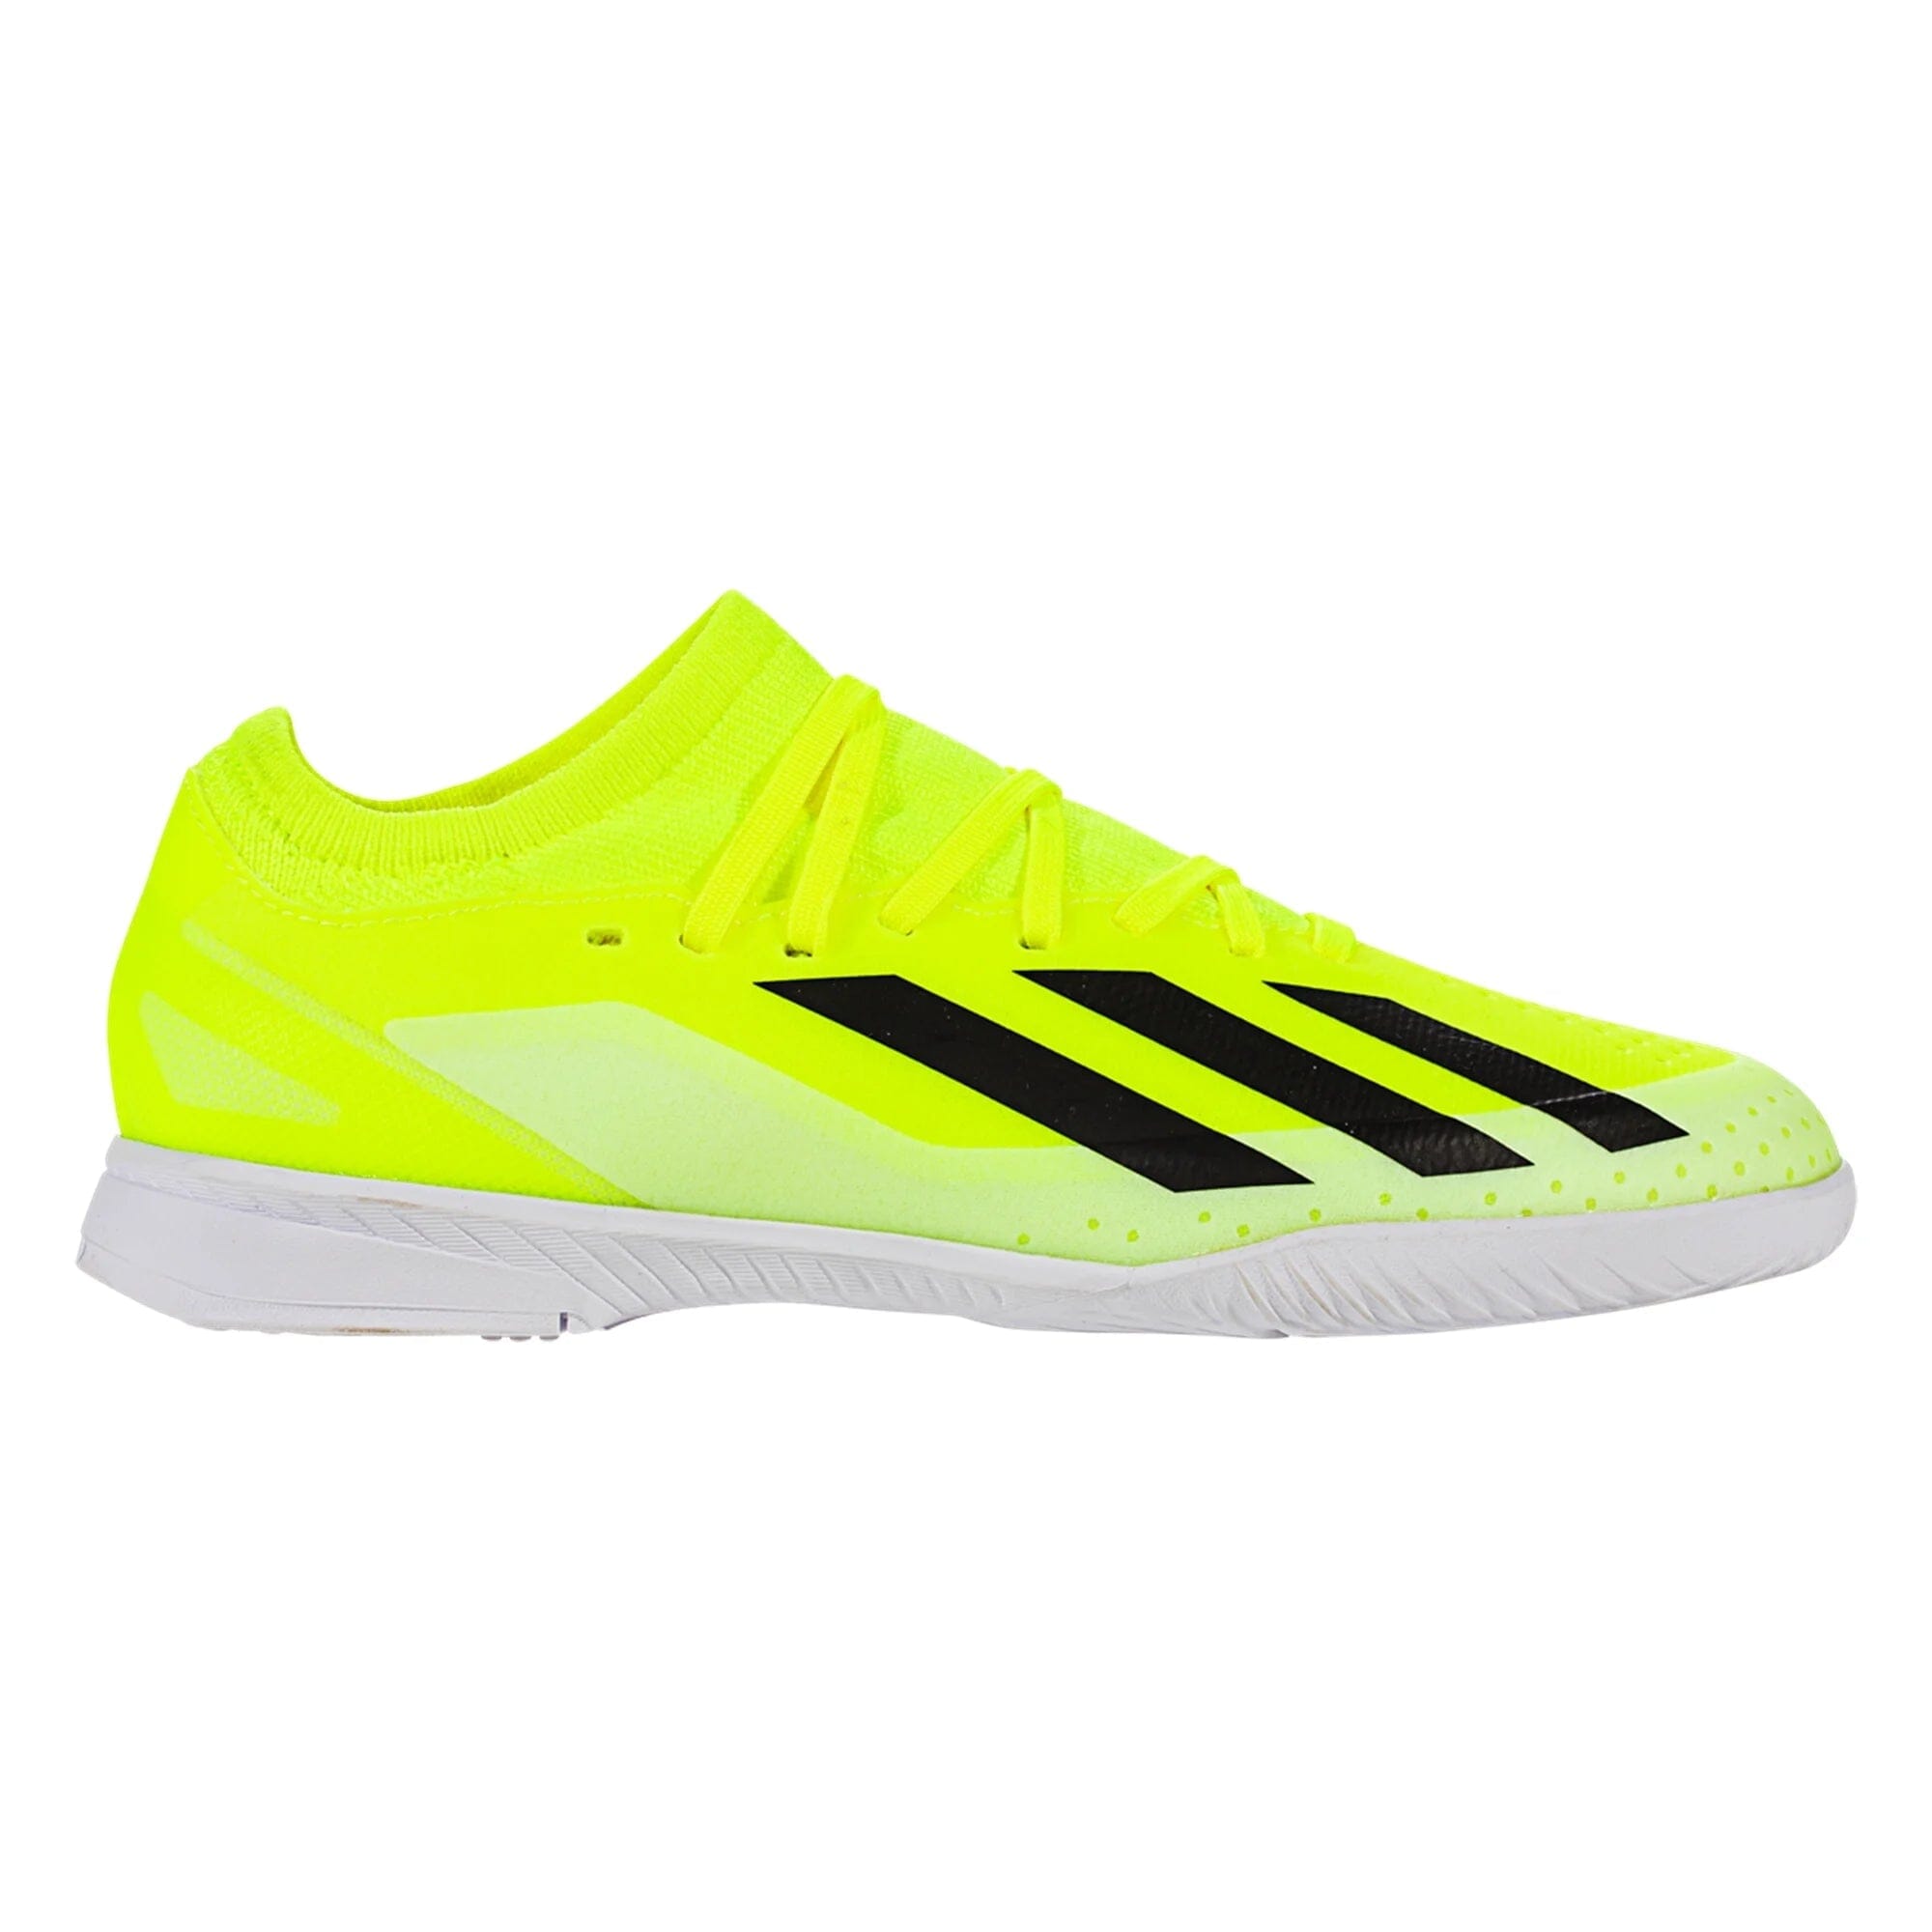 adidas Youth X Crazyfast League Indoor Shoes | IF0685 Adidas 1 TEAM SOLAR YELLOW 2/CORE BLACK/FTWR WHITE 